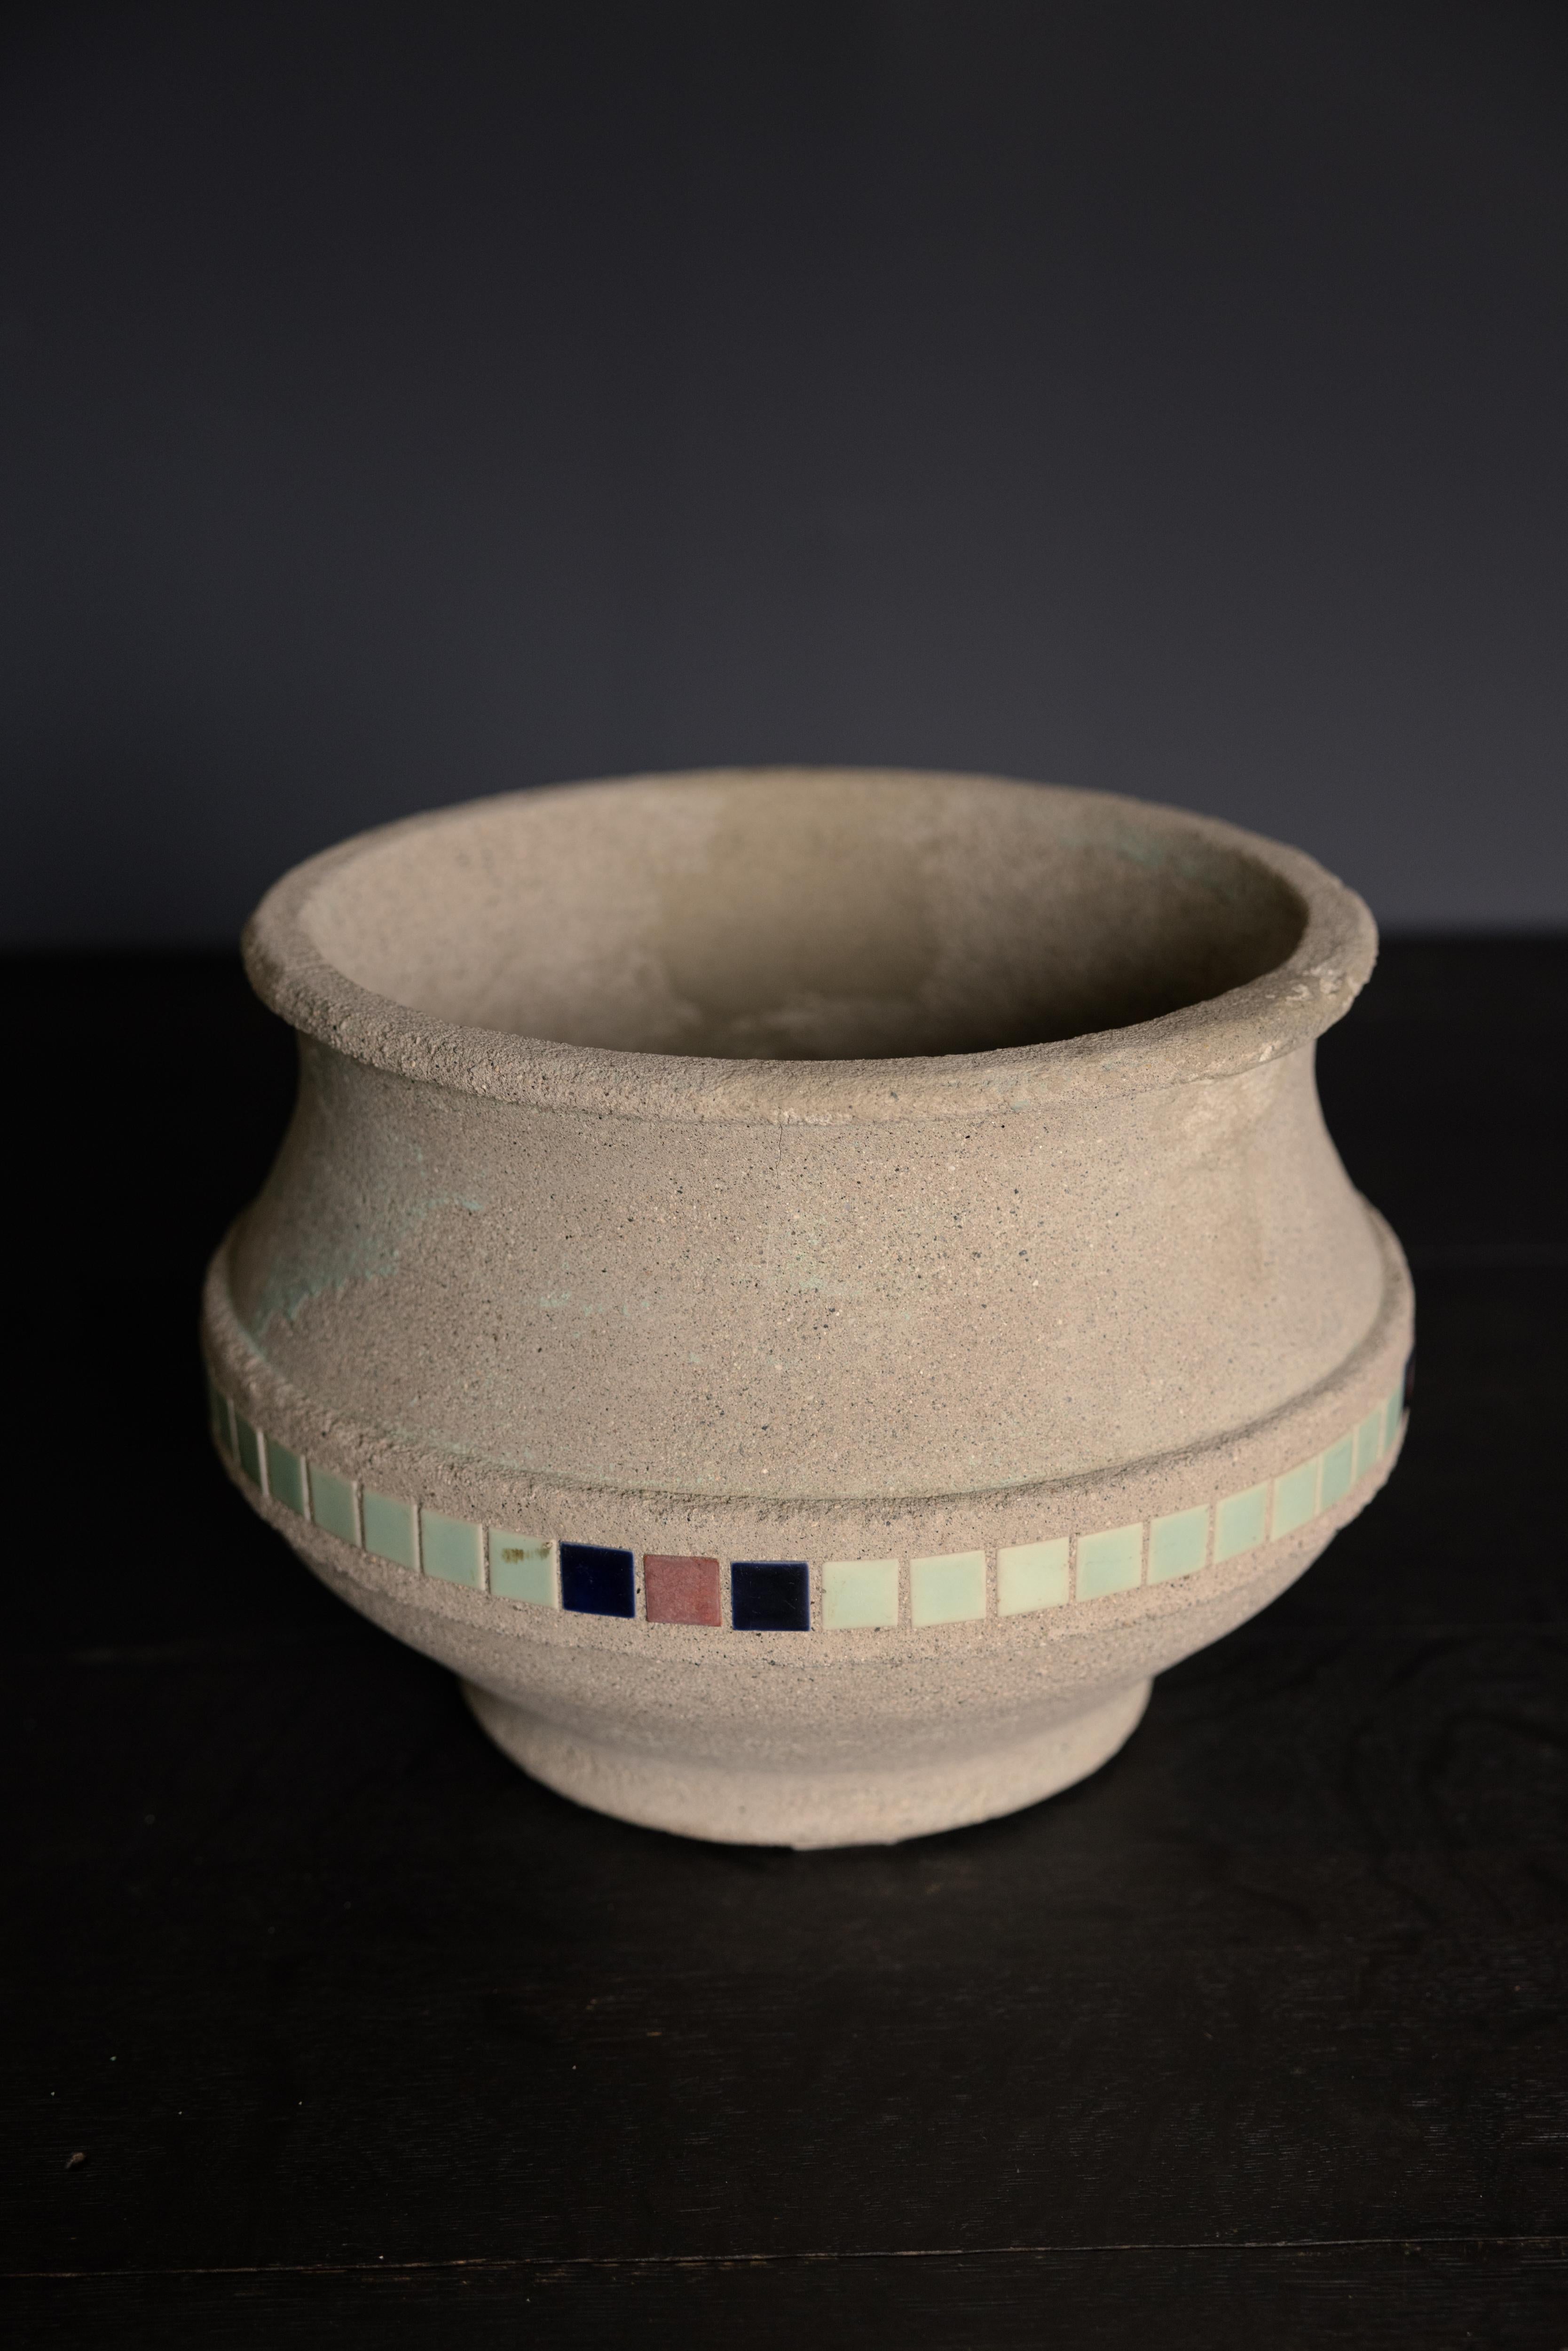 Concrete and Tiled Mosaic Planter by Hillside Pottery Company, c. 1920's, USA
Gray Concrete with Tiled Mosaic Band in Green with Blue and Pink

H 10